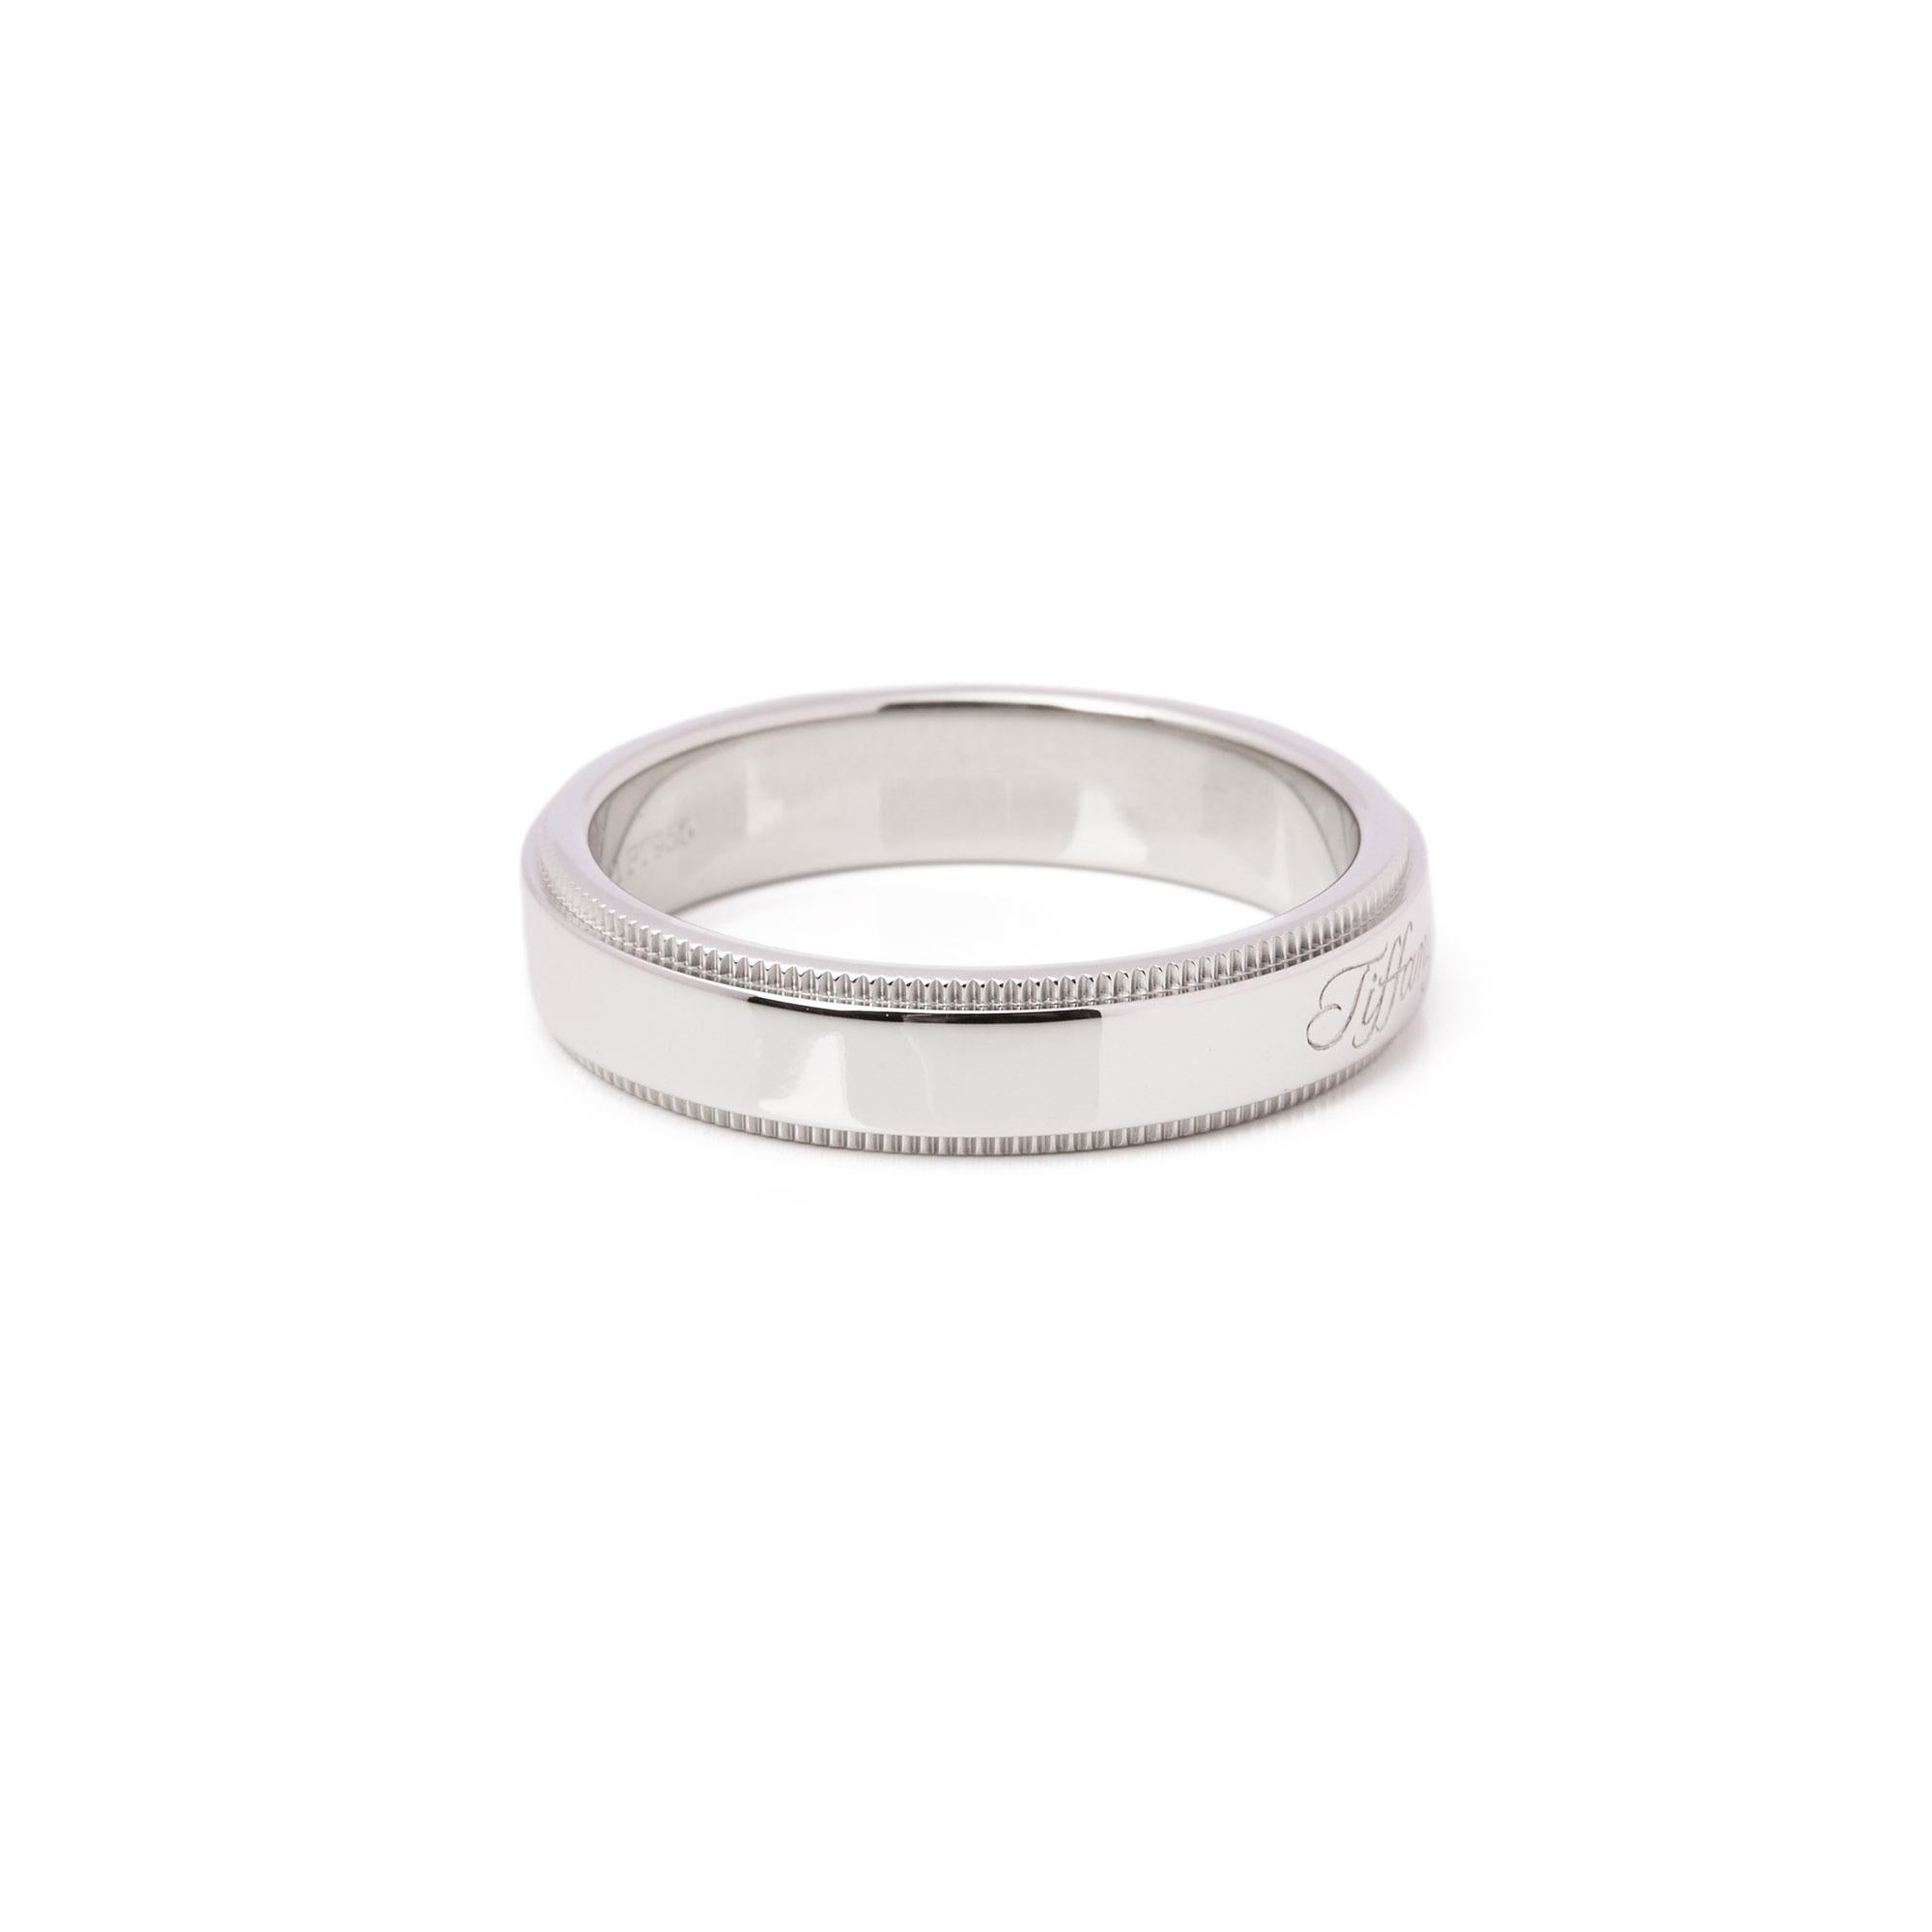 This ring by Tiffany is from their Notes collection and features a Tiffany & Co inscription along the outer band along with a milgrain edging. Set in a platinum band ring. UK ring size L. EU ring size 51. US ring size 5 3/4. Complete with Tiffany